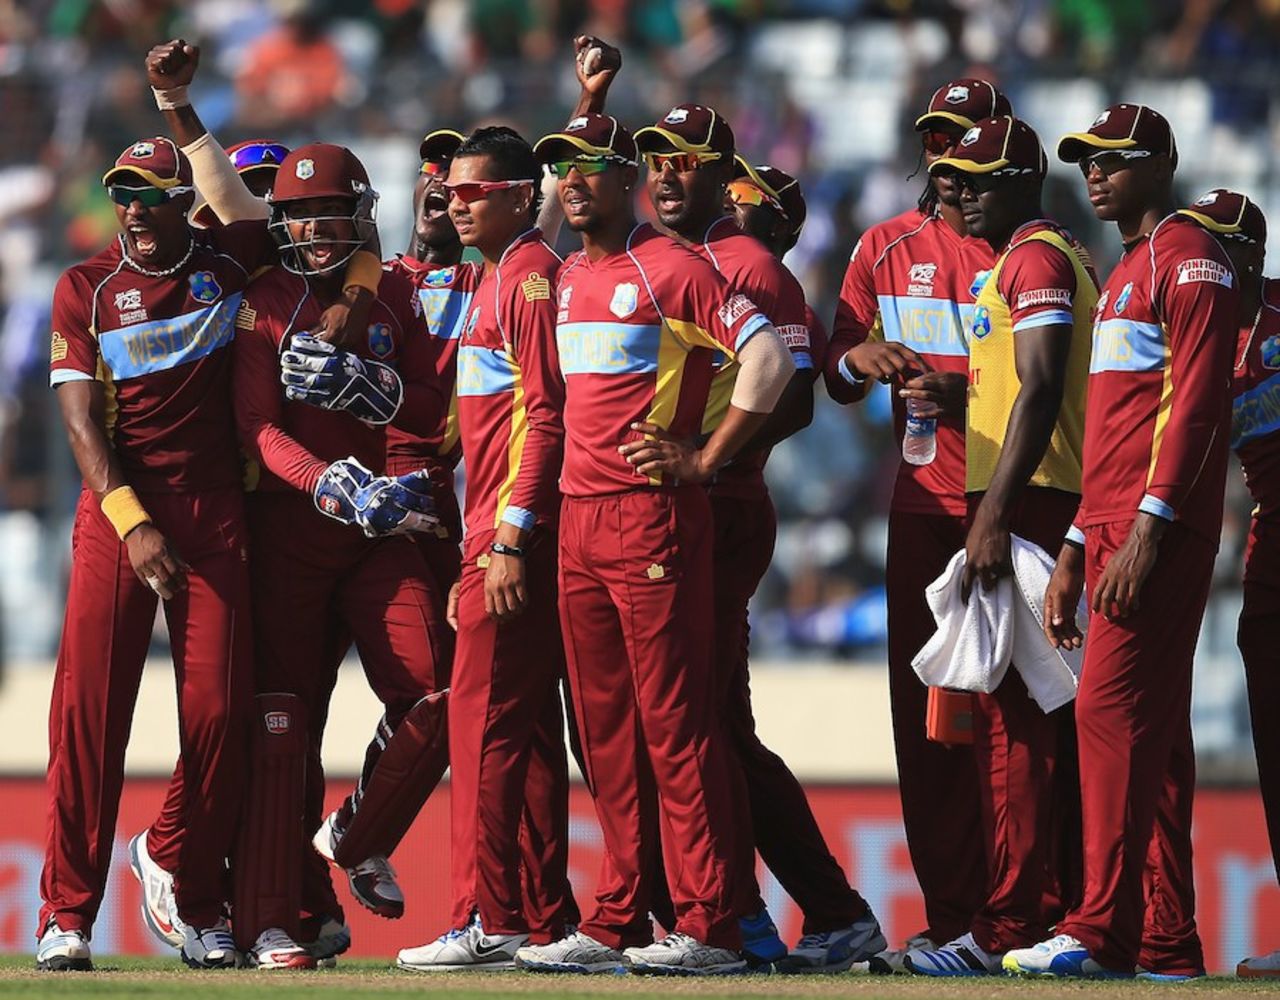 West Indies celebrate after Shane Watson is given out stumped by the third umpire, Australia v West Indies, World T20, Group 2, Mirpur, March 28, 2014